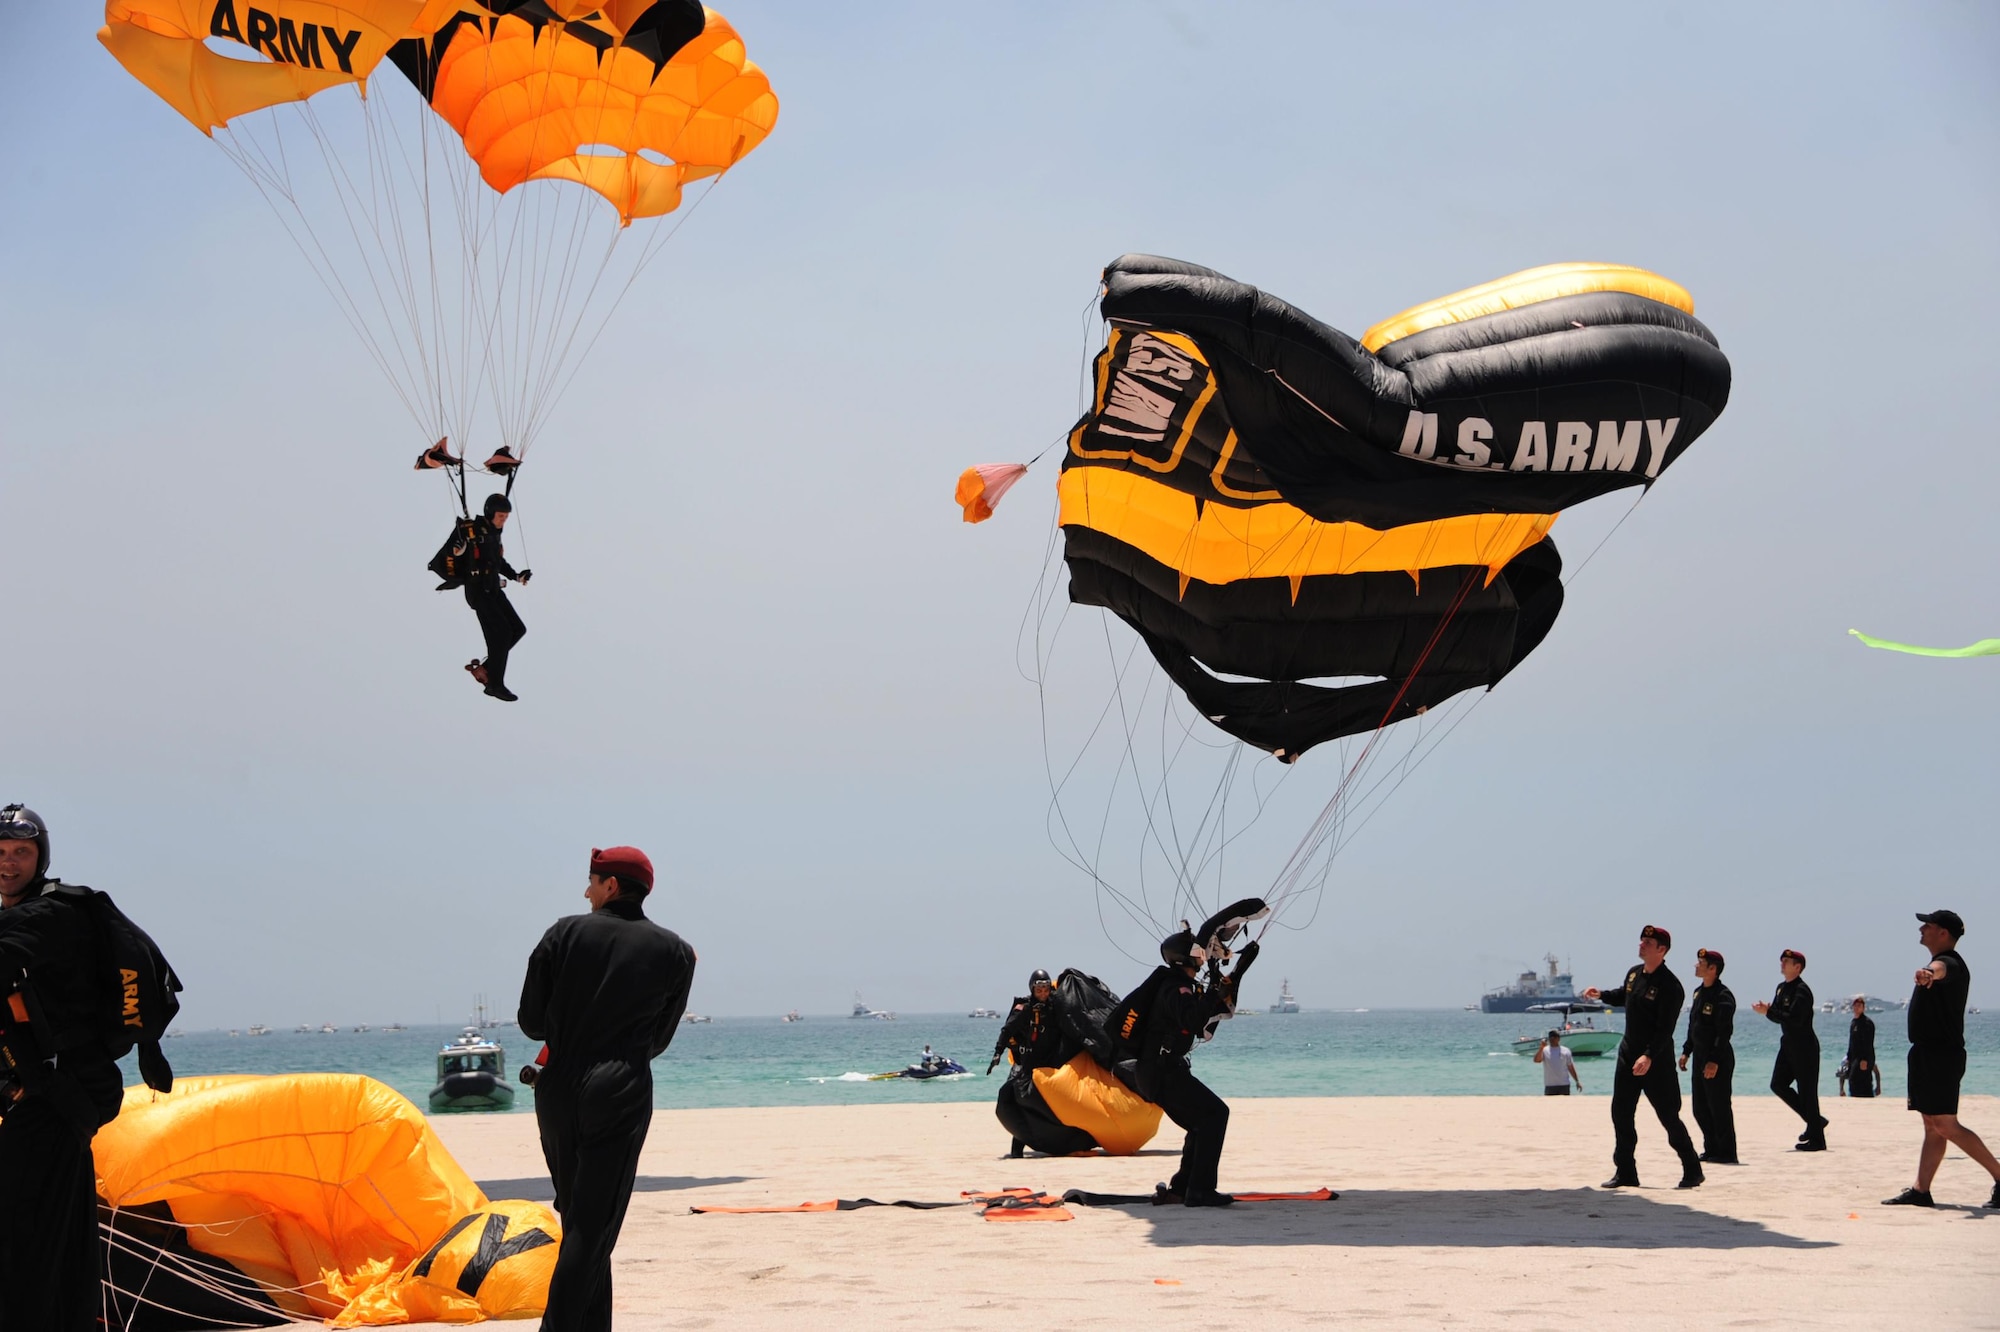 Members of the U.S. Army Golden Knights Parachute Team land after a demonstration during the Salute to America’s Heroes Air and Sea Show in Miami Beach, Fla., May 28, 2017. Members representing all branches of the U.S. Armed Forces took part in the Memorial Day weekend airshow to increase public awareness and understanding of each branch’s unique mission and capabilities. (U.S. Air Force photo by Senior Airman Erin Trower)